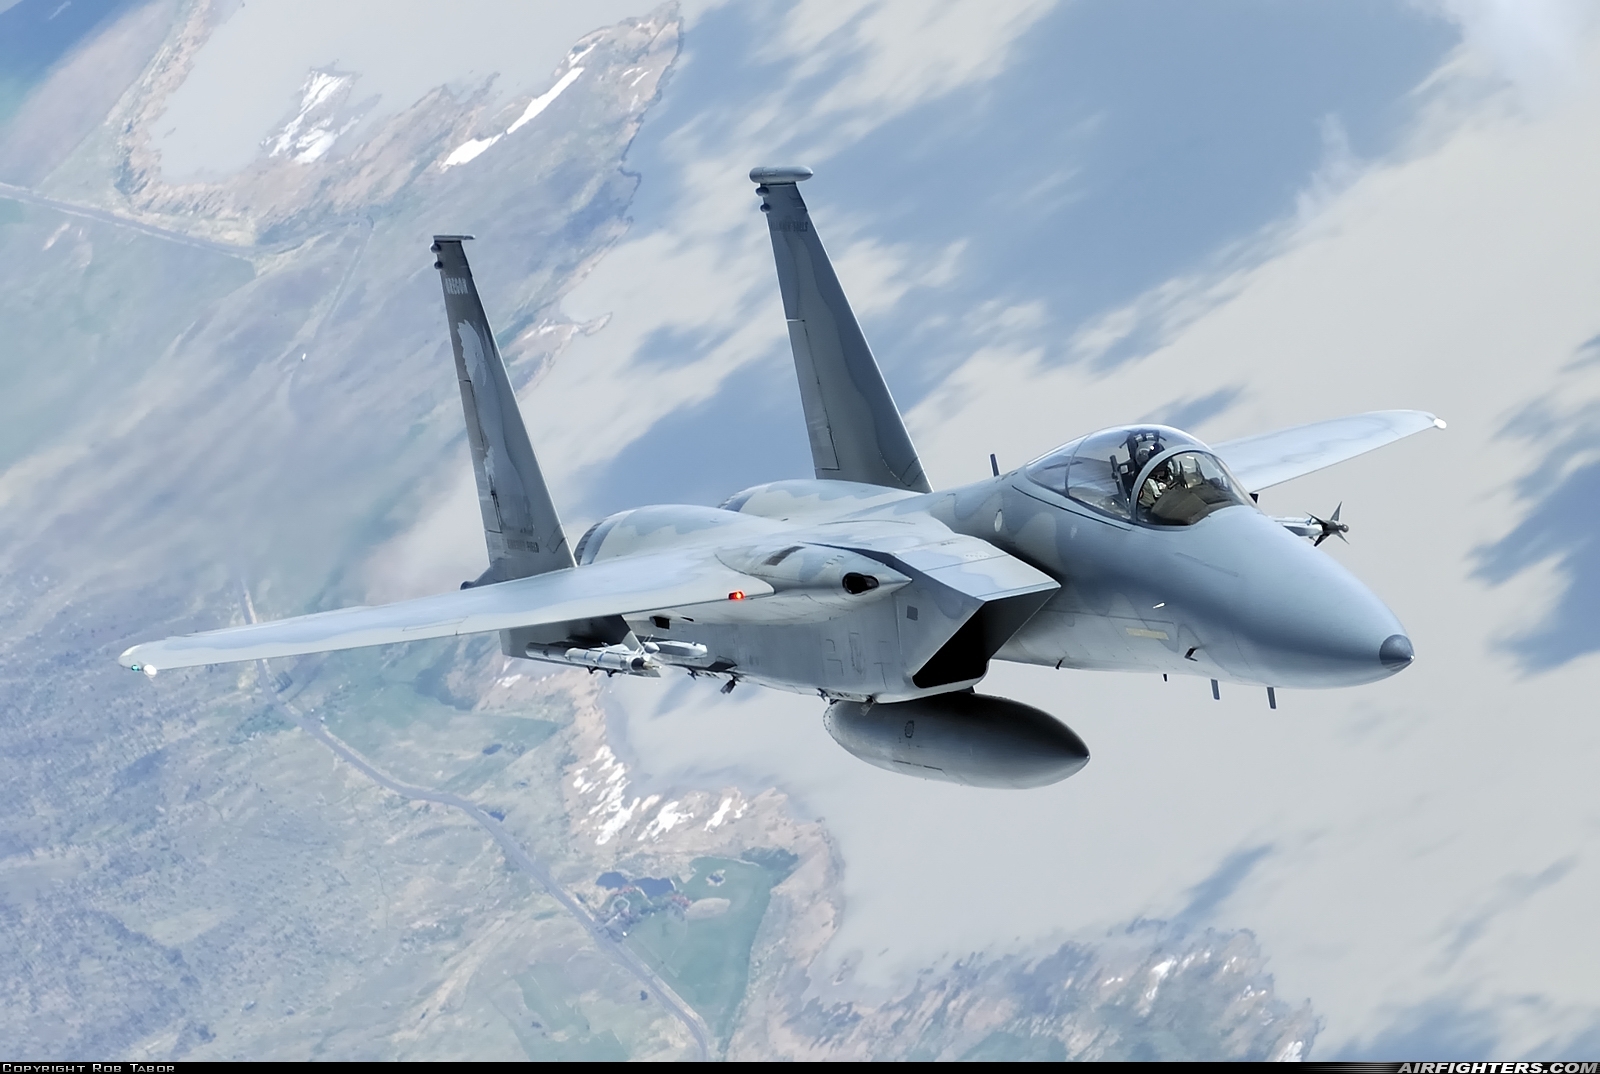 USA - Air Force McDonnell Douglas F-15C Eagle 83-0016 at In Flight, International Airspace